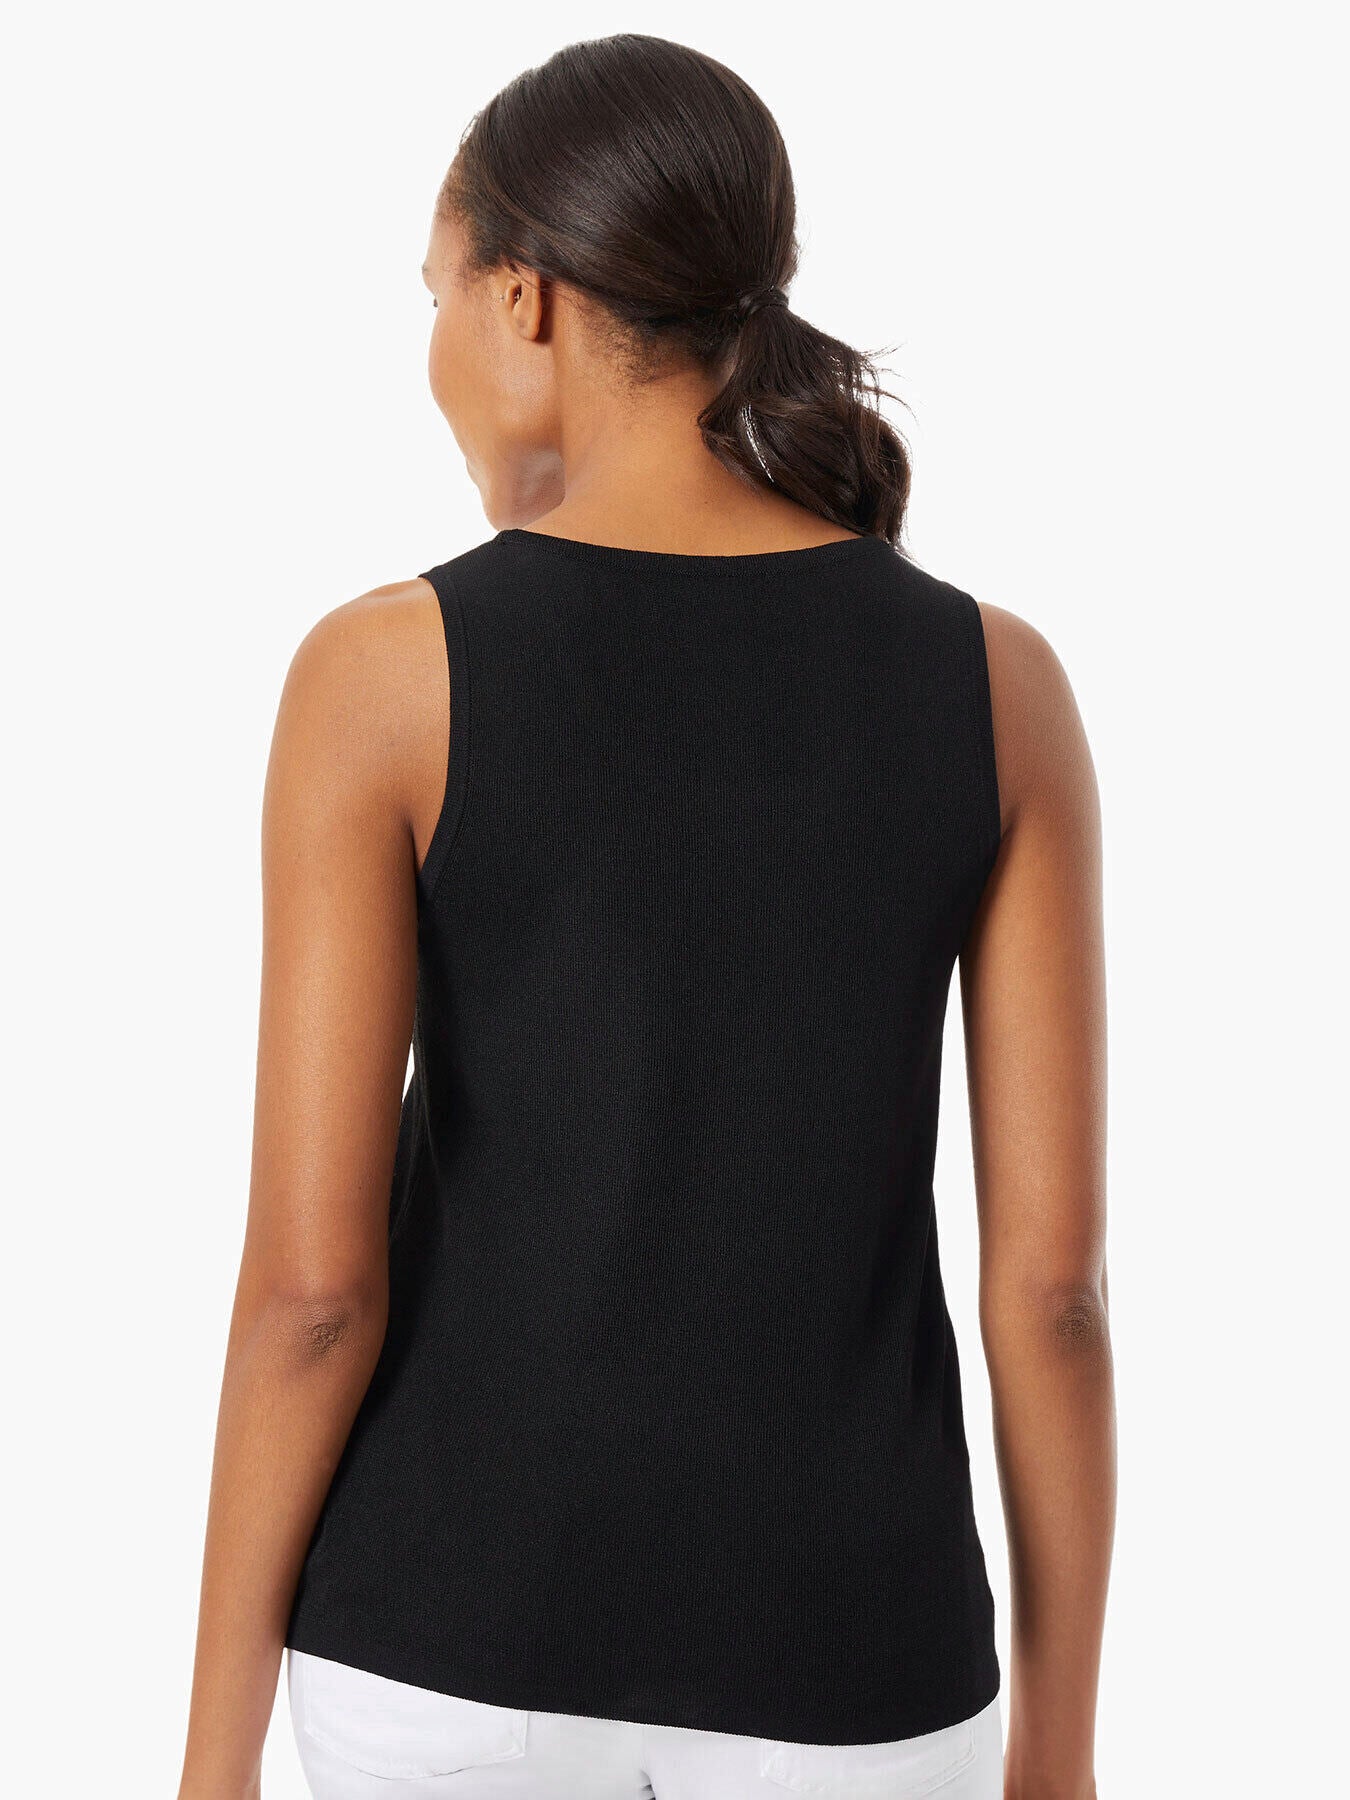 Body - Soft Rib Tank Top in Washed Black